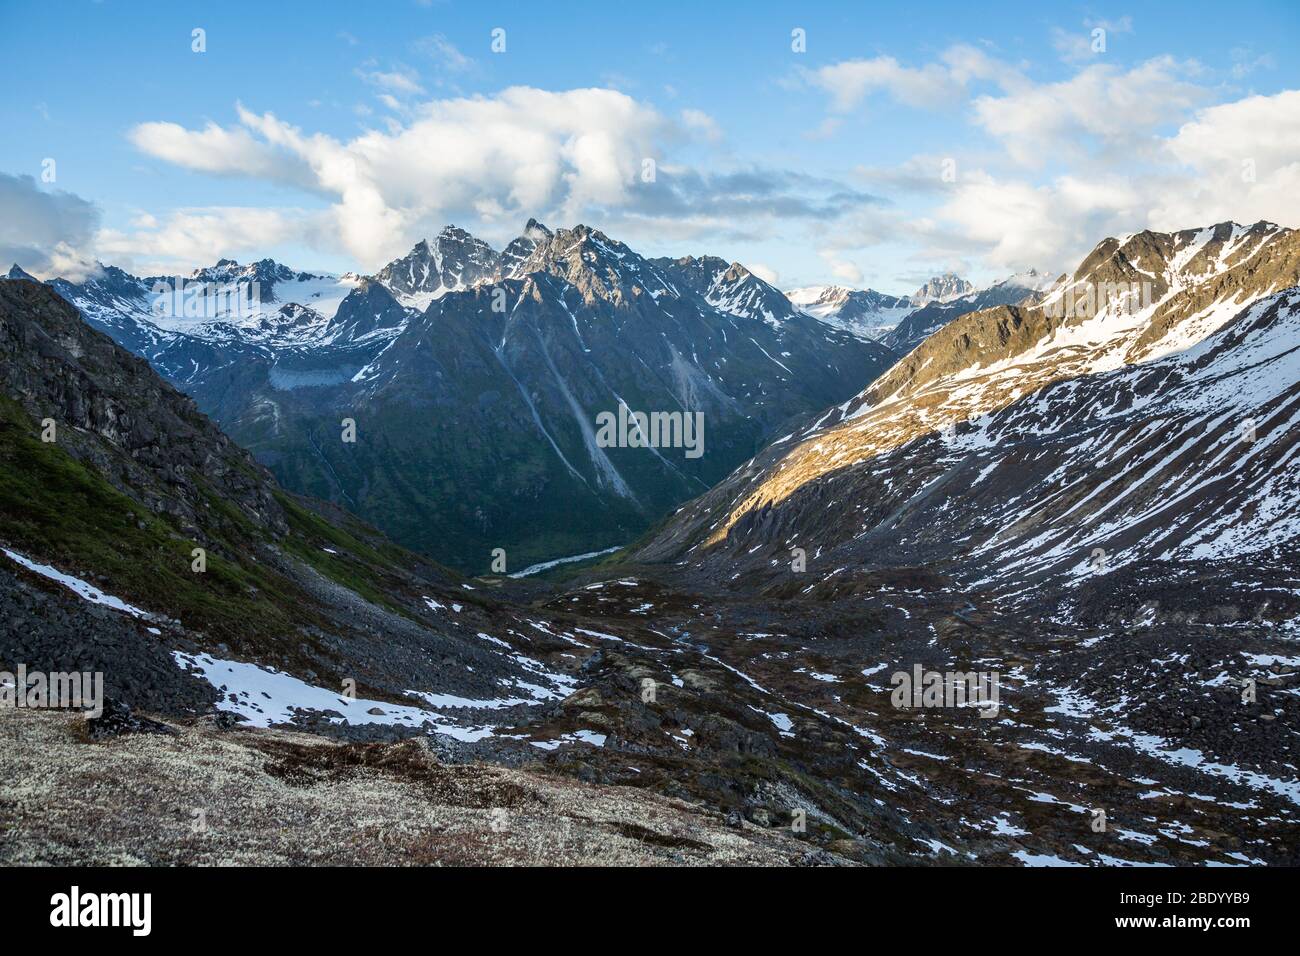 Pure wilderness of the remote Talkeetna Mountains miles from civilization as the snow melts in spring. Stock Photo